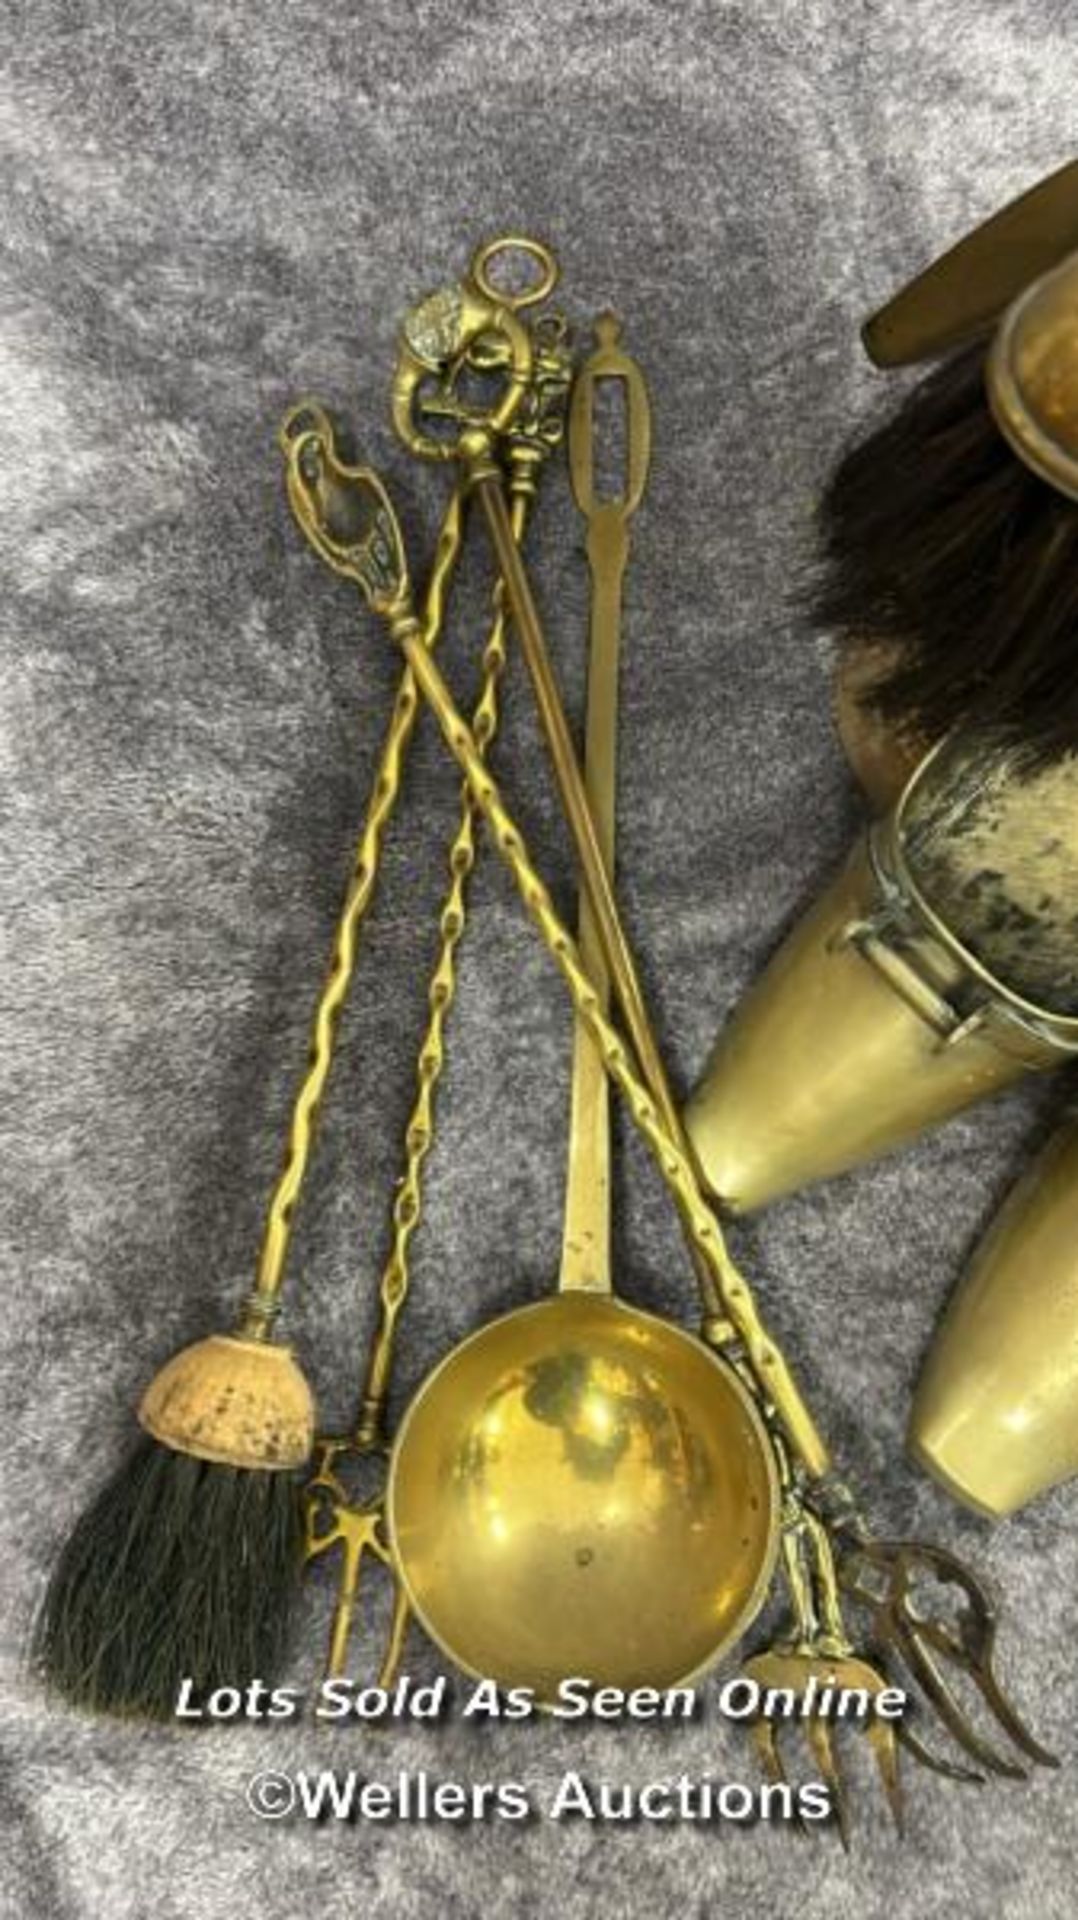 Vintage brass including fire stoker set, iron stand and brass stirrups / AN14 - Image 7 of 7